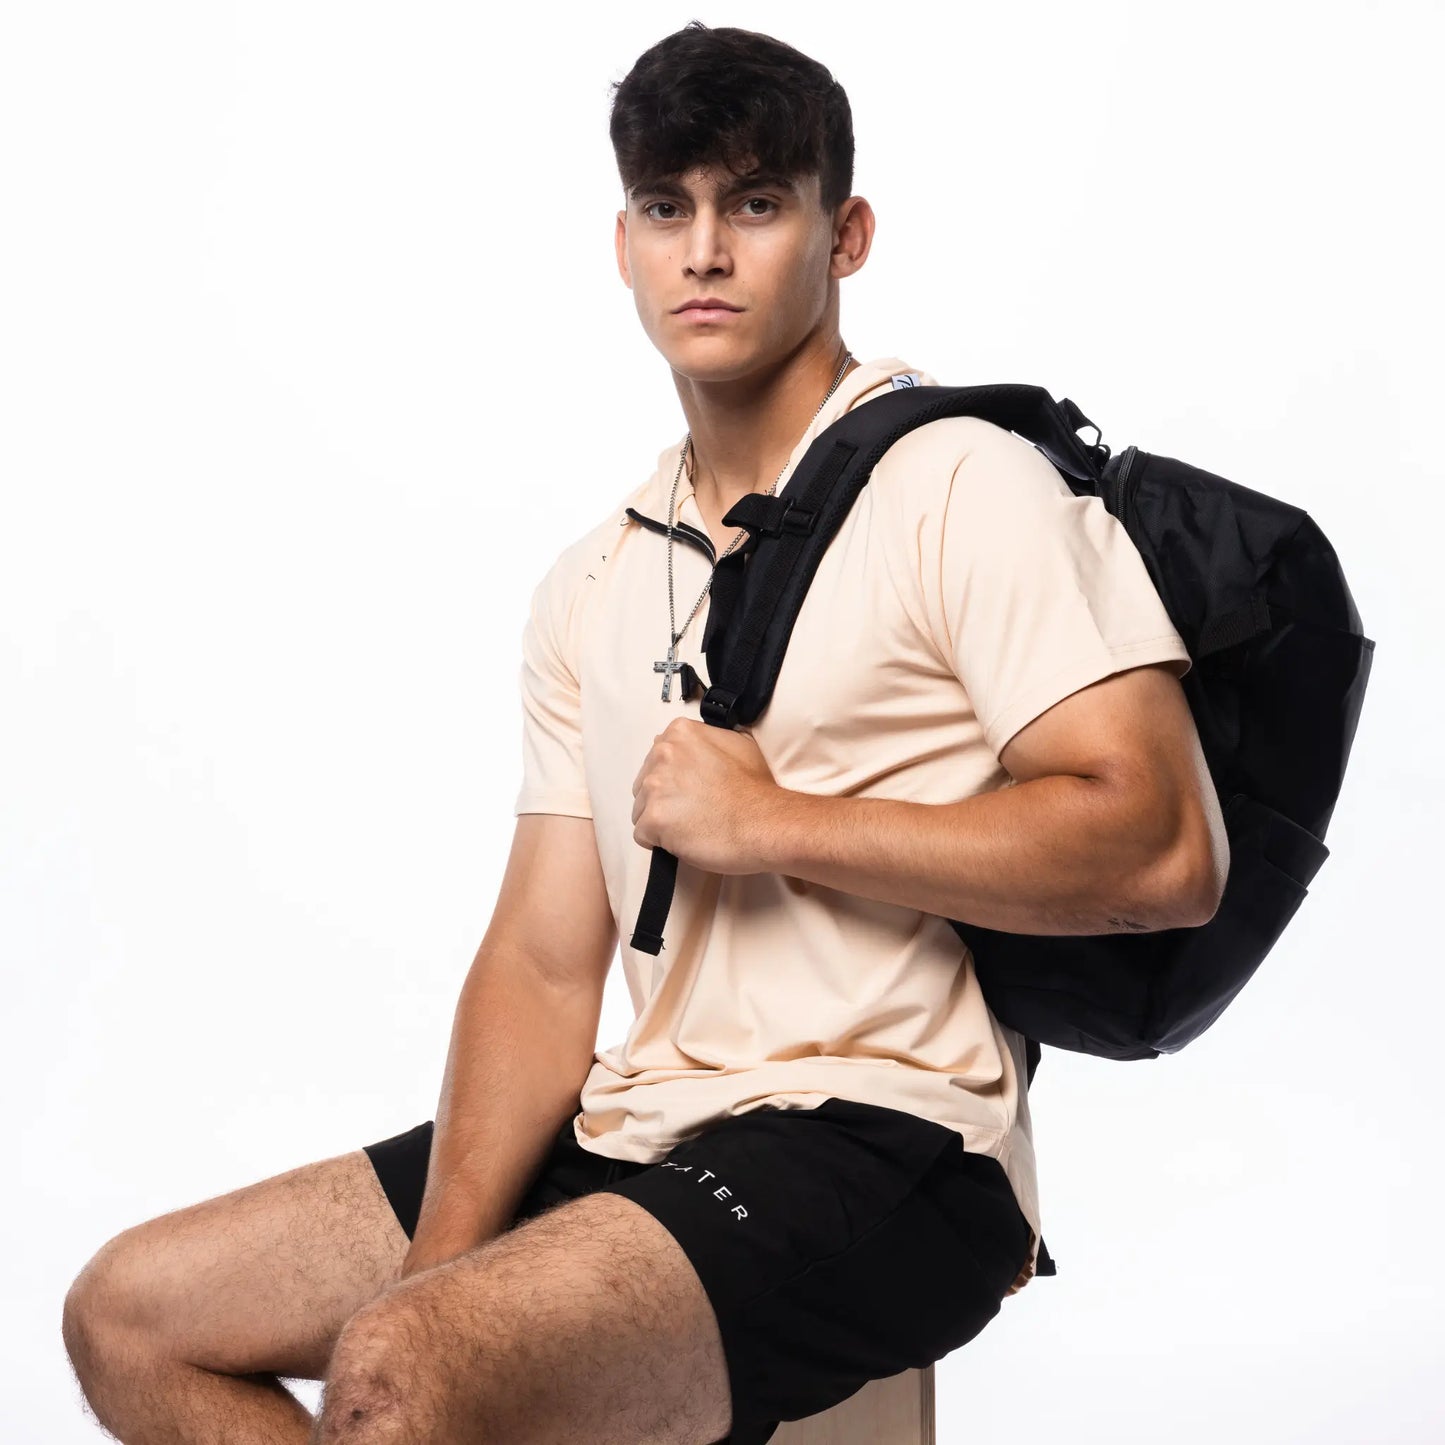 In the image, there is a young man wearing a tan short-sleeved hoodie and black athletic shorts, both featuring the "TATER" logo, which suggests they are part of a baseball athletic wear line. He is also carrying a black backpack over one shoulder and has a set of earphones around his neck. His attire and accessories indicate a casual, sporty aesthetic, likely targeting athletes or individuals with an active lifestyle.